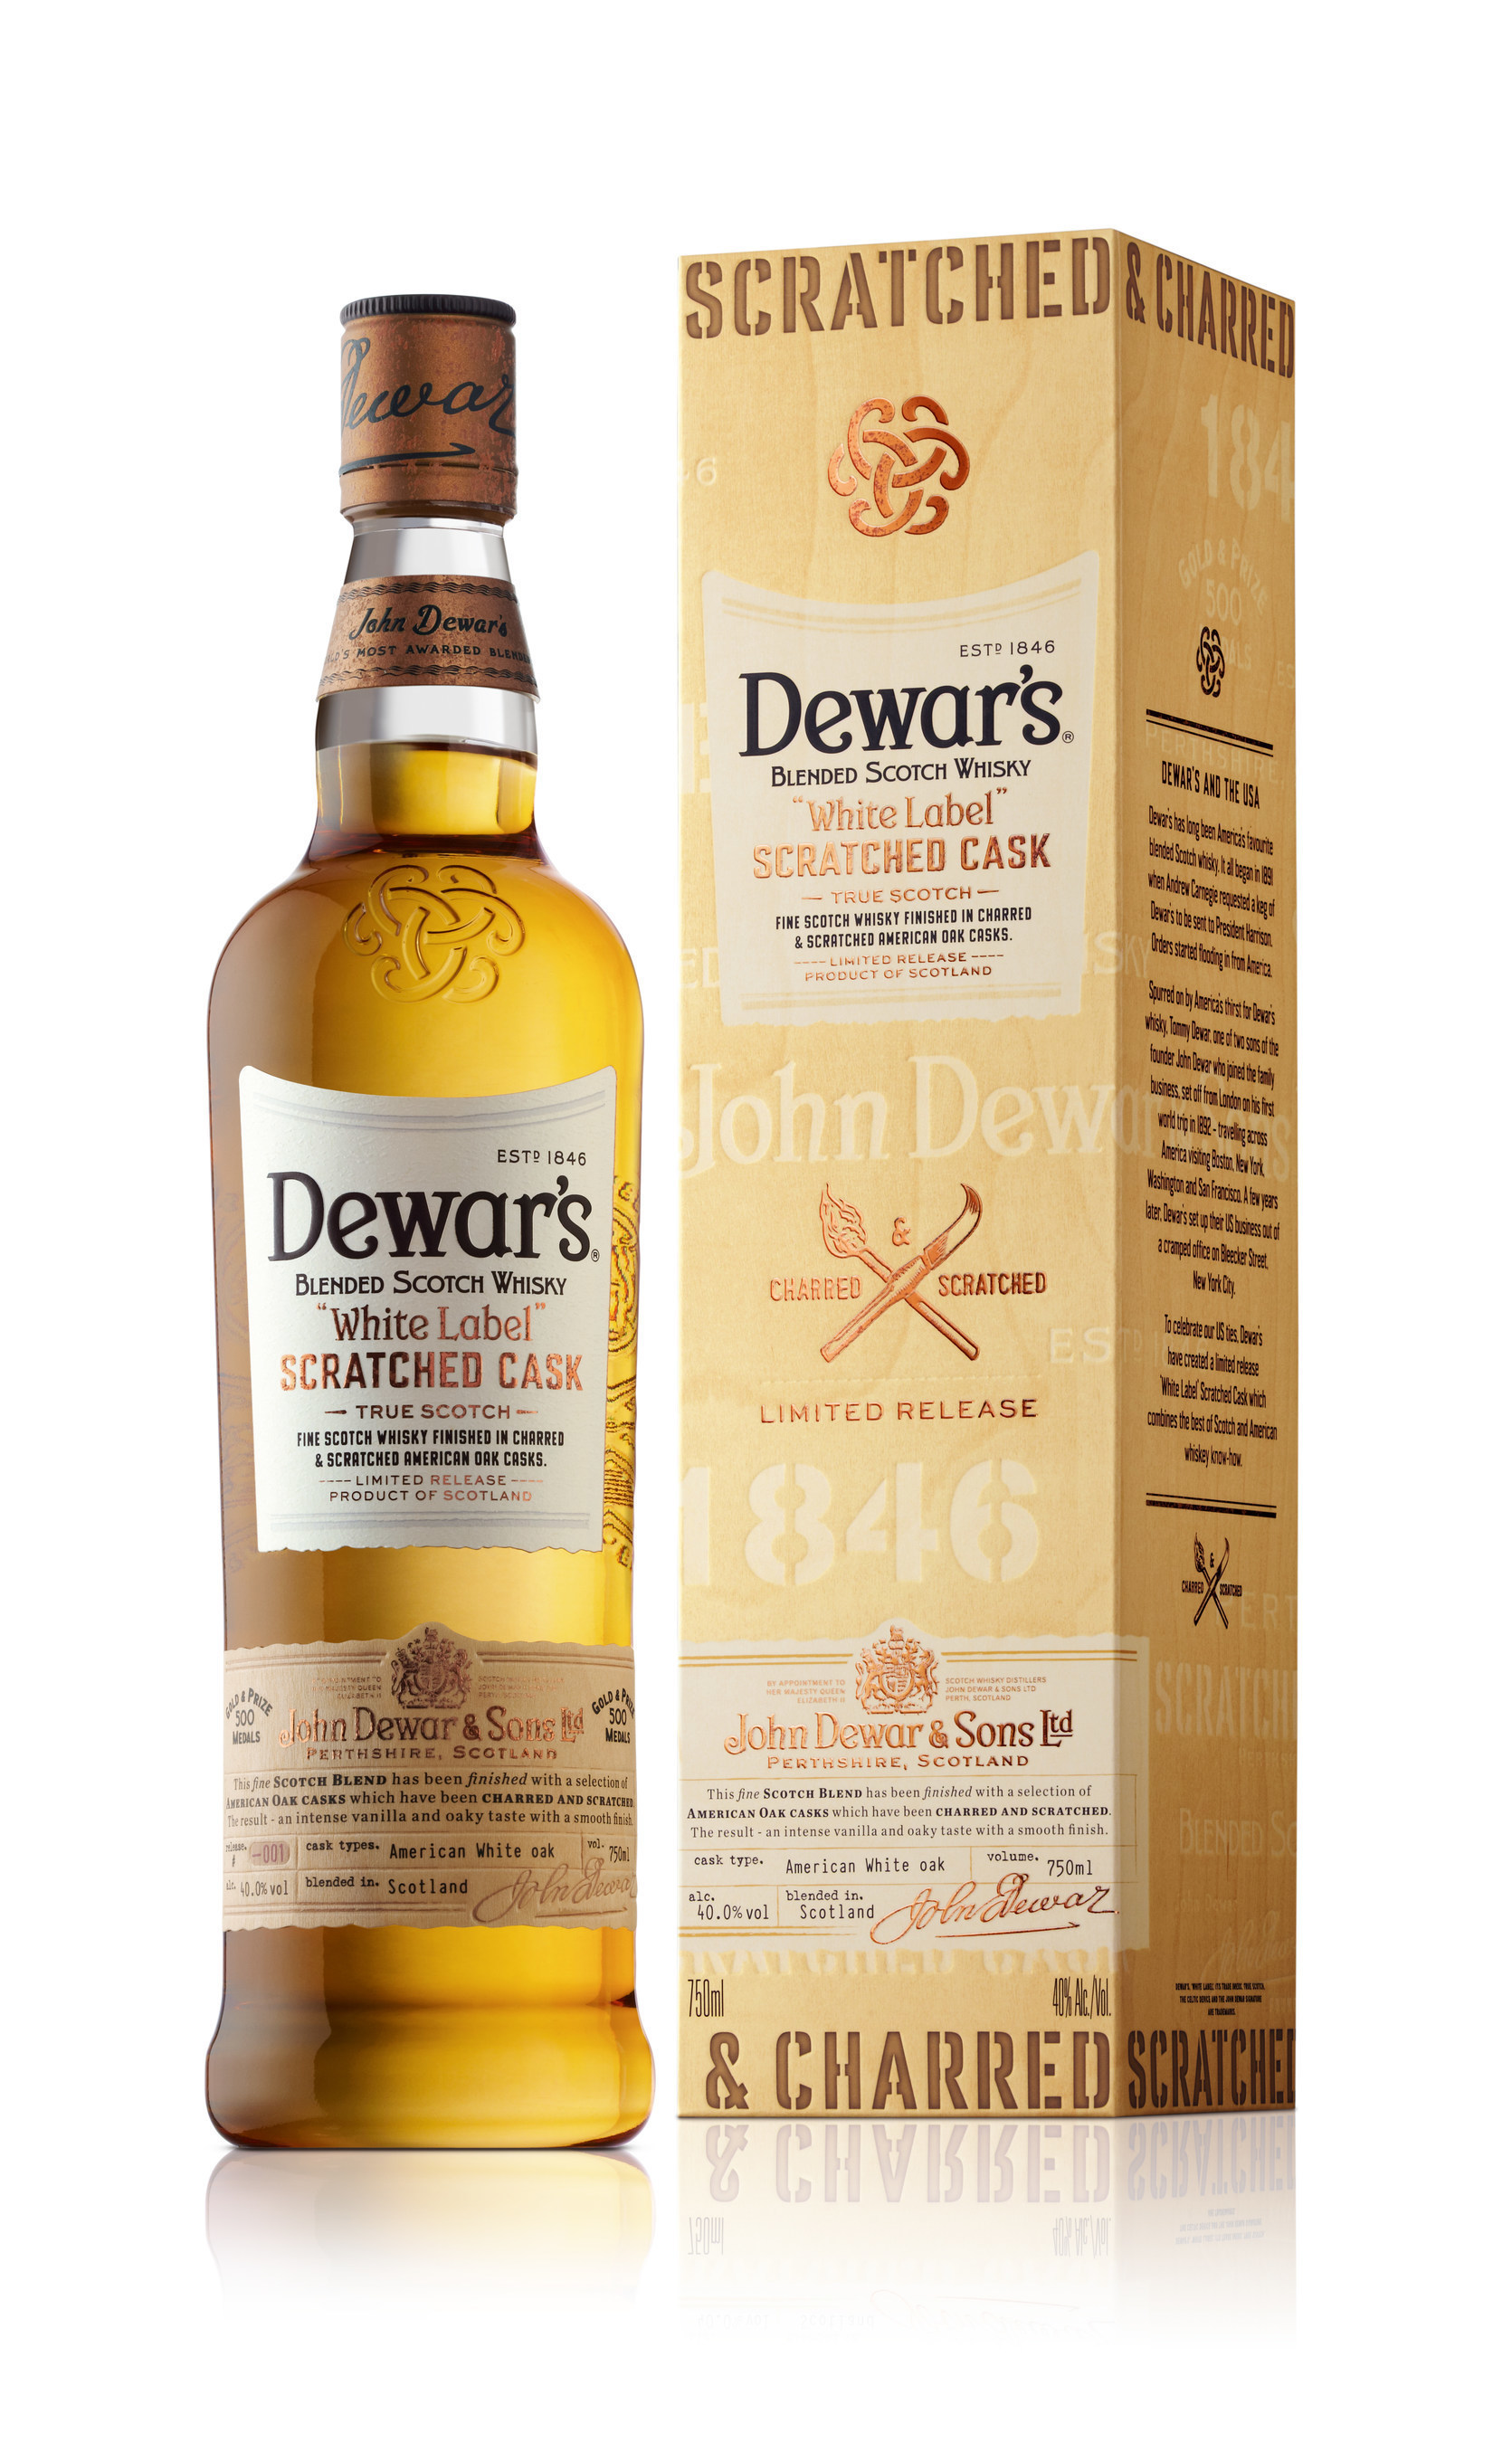 DEWAR'S(R) SCRATCHES ITS WAY TO A SMOOTH AND FLAVORFUL NEW SCOTCH